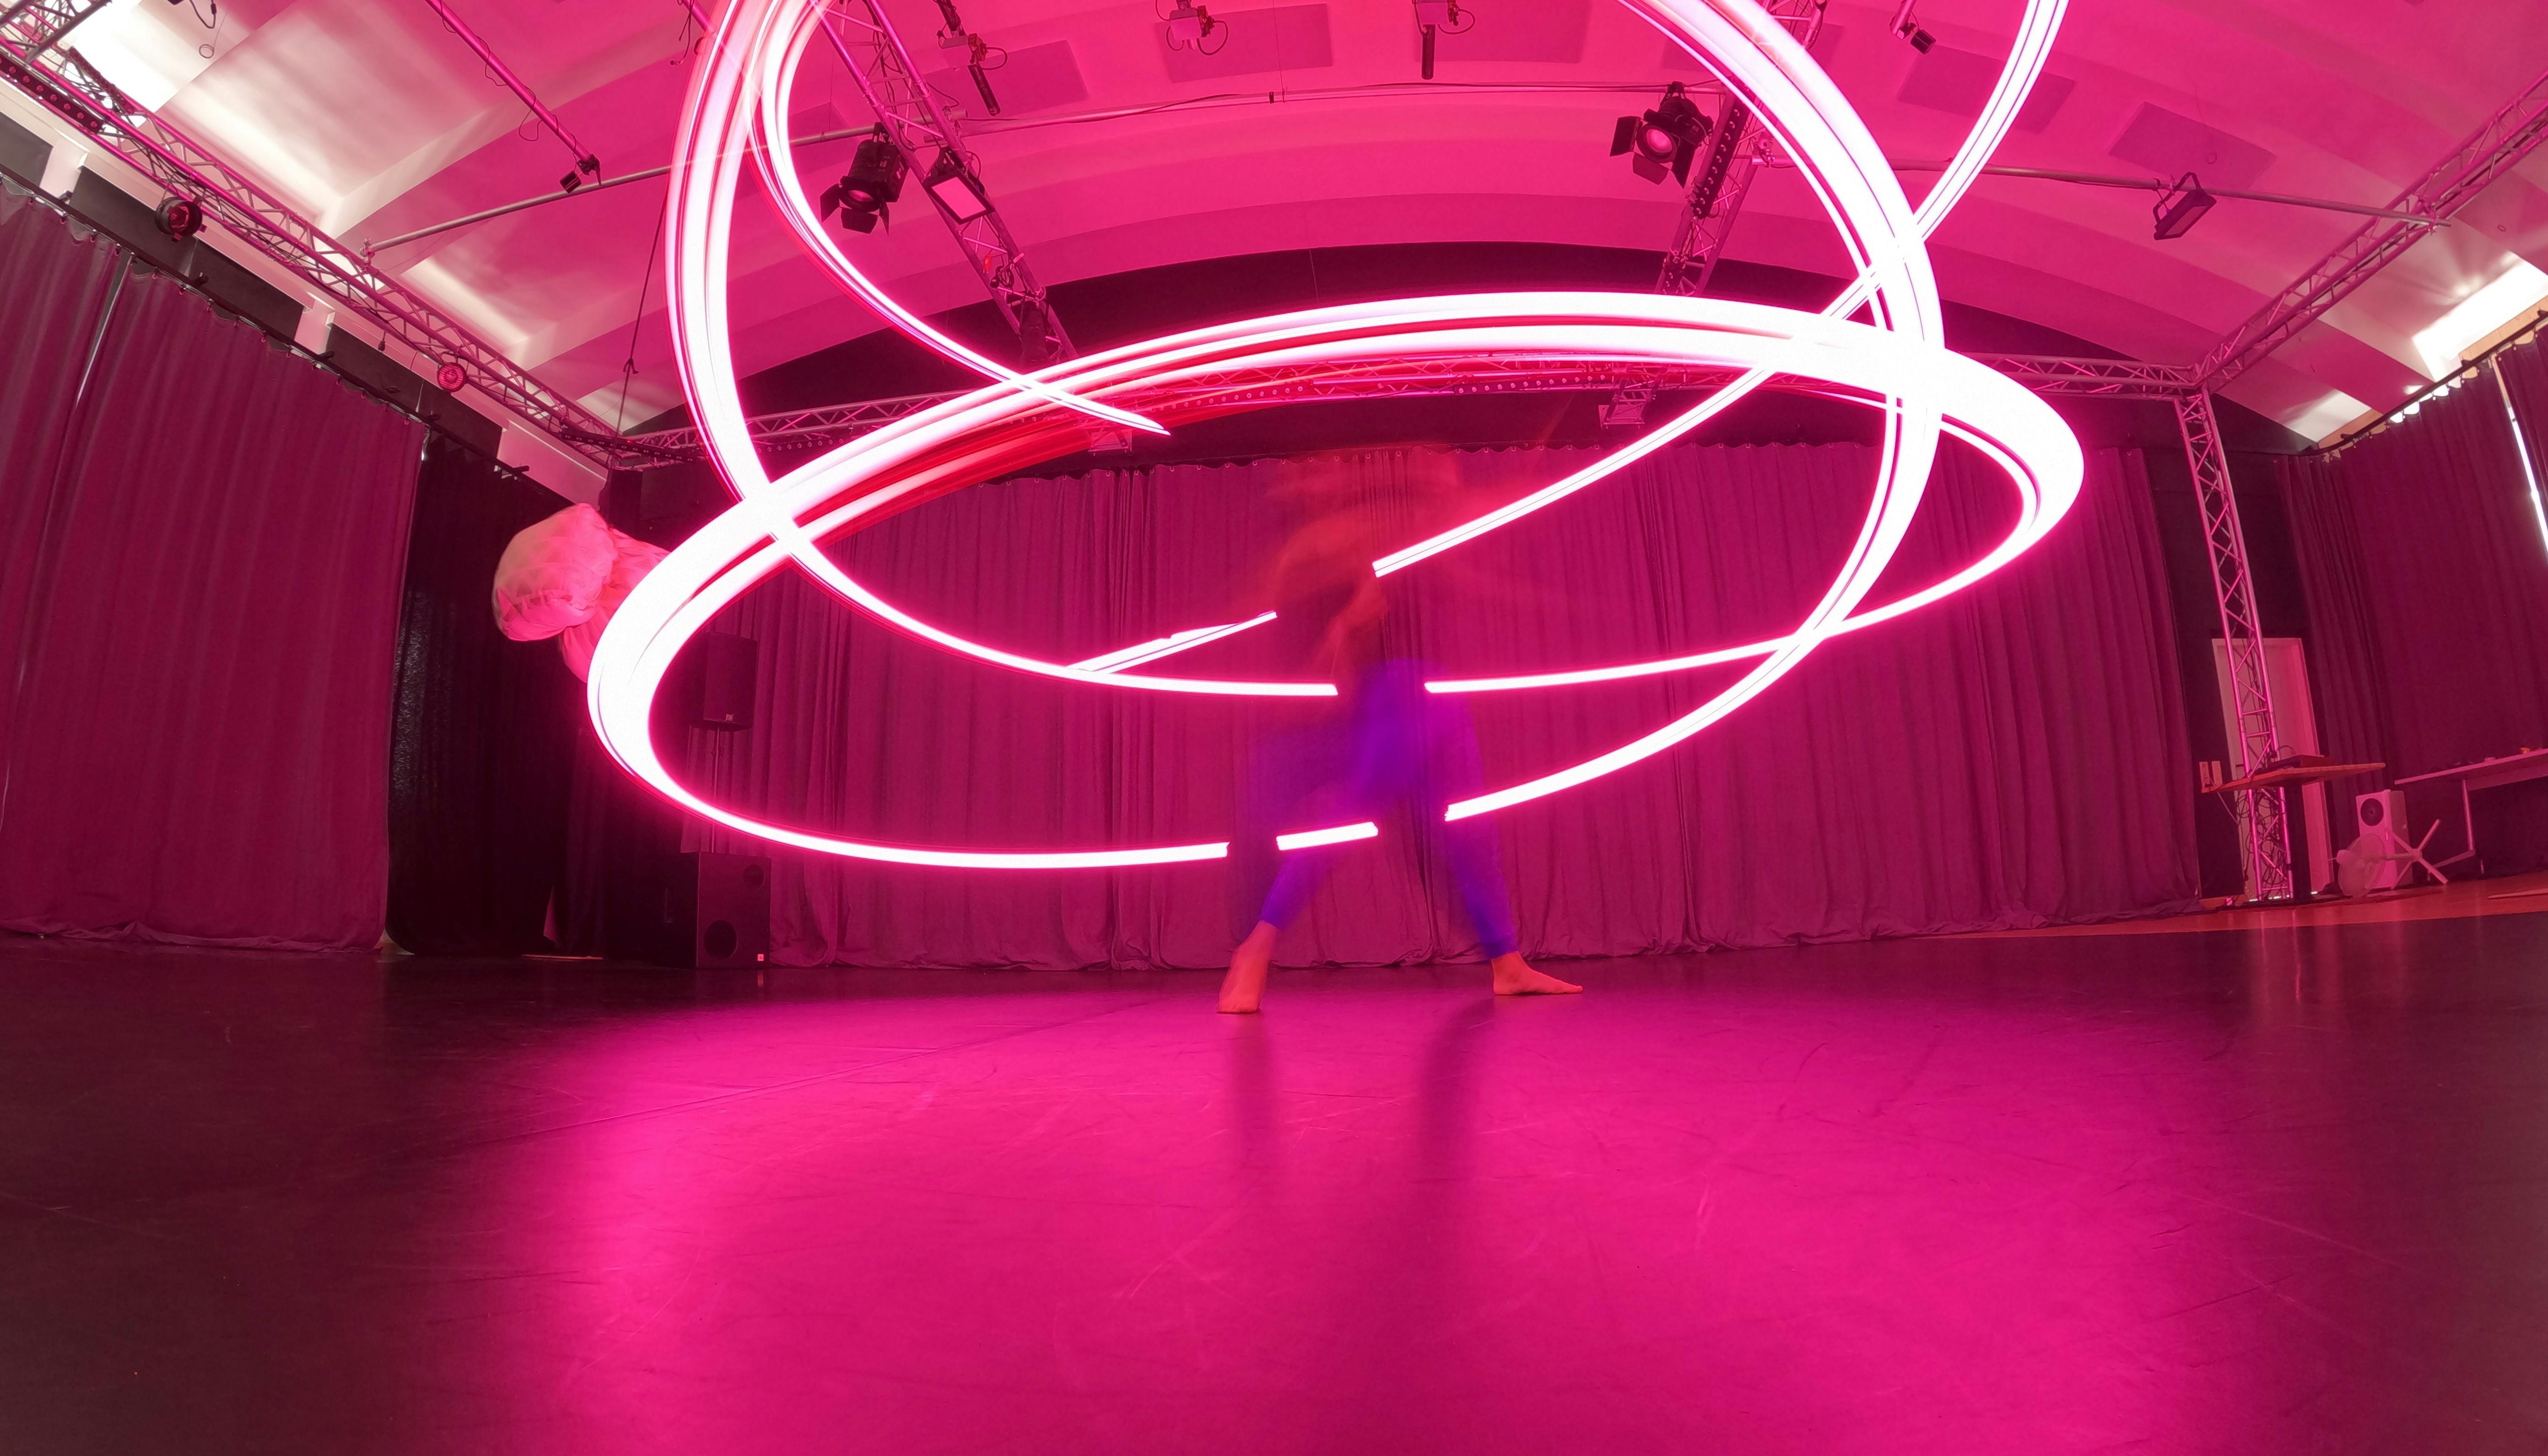 Lorenzo Morandini in motion with a pink LED lighting up the room